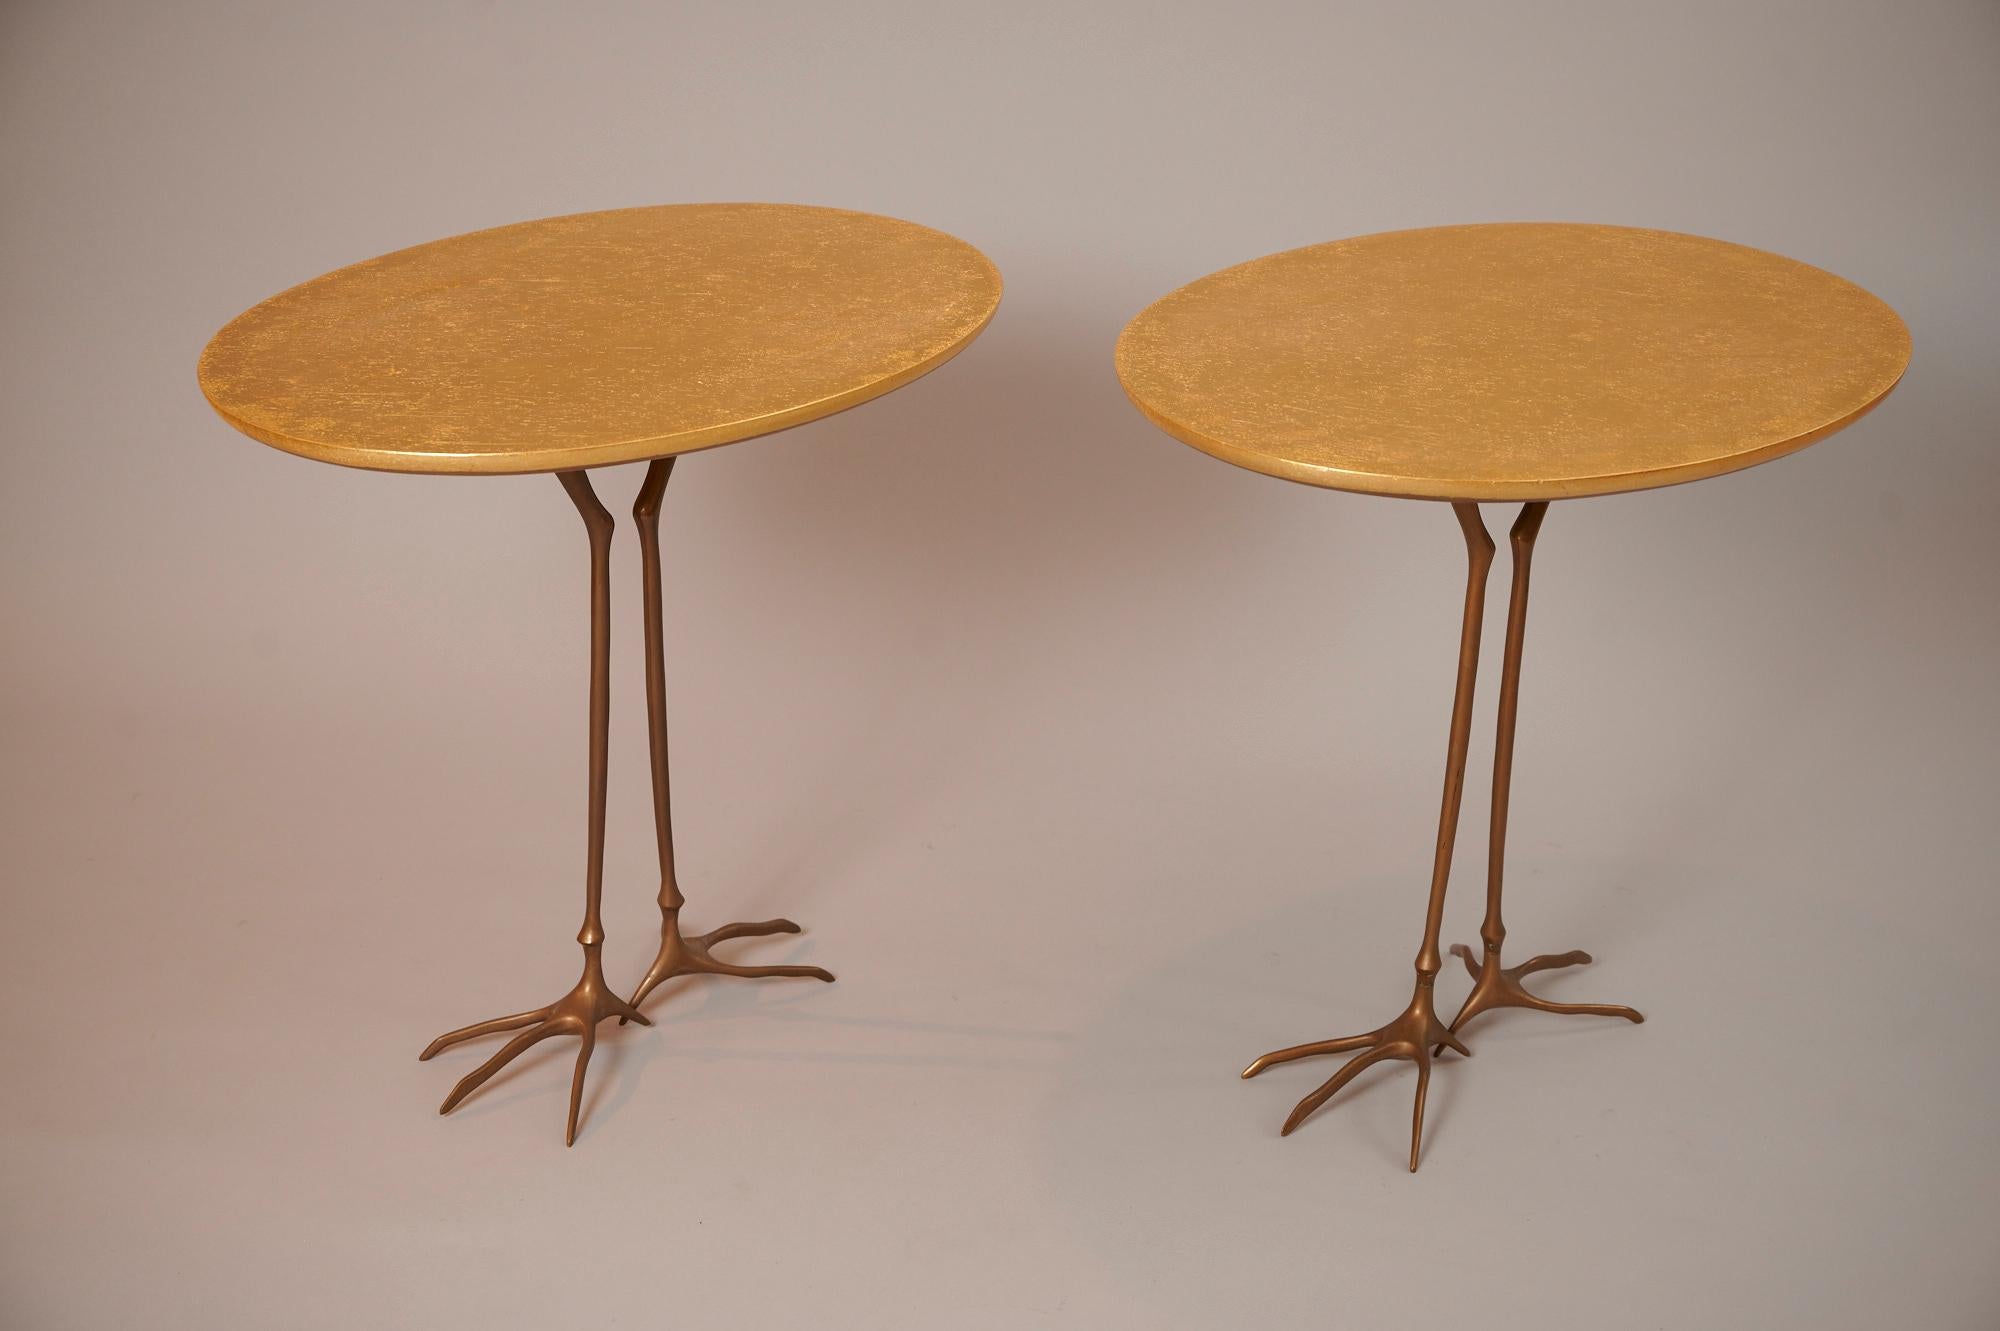 A pair of restored Meret Openheim 'Traccia' tables for Studio Simon.

A superb pair of Surrealist tables designed by Meret Openheim in the 1930s. Fully restored.